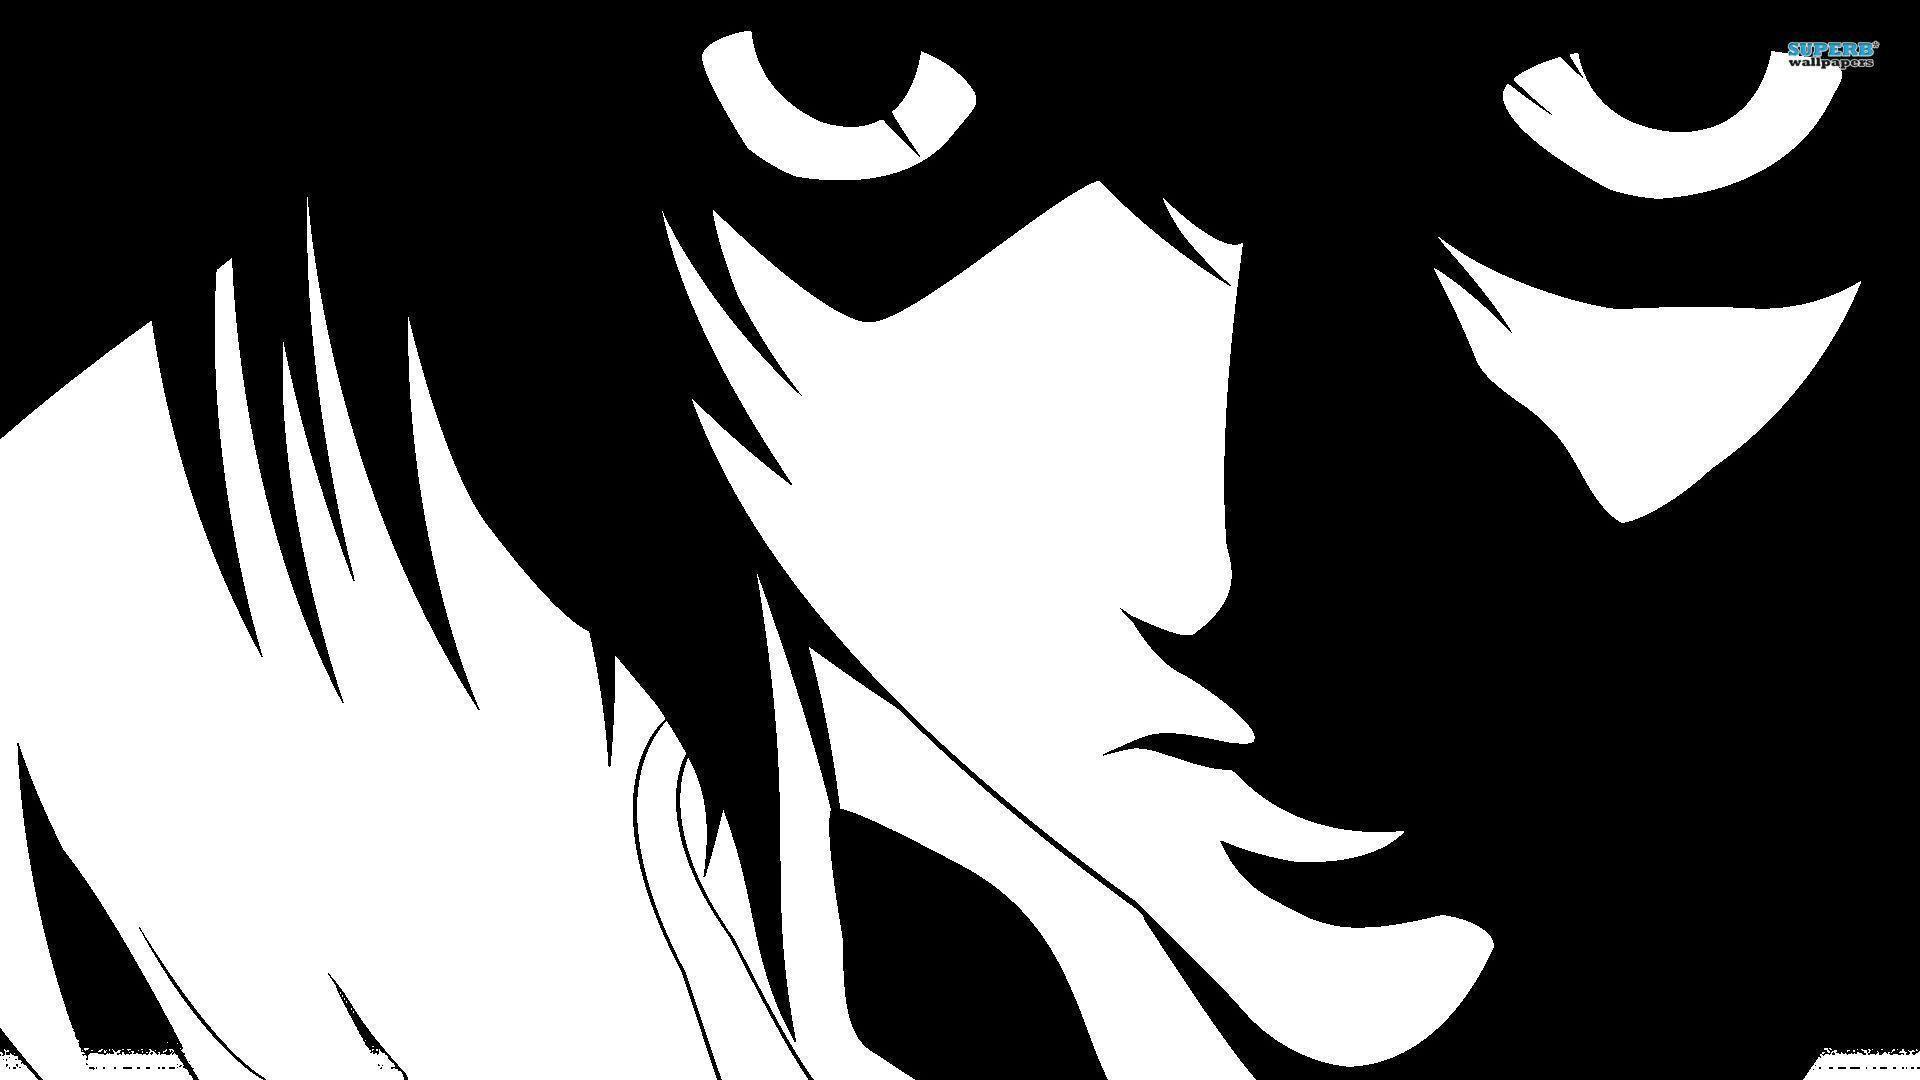 [49+] l from death note wallpaper on wallpapersafari on cool anime death note l logo wallpapers